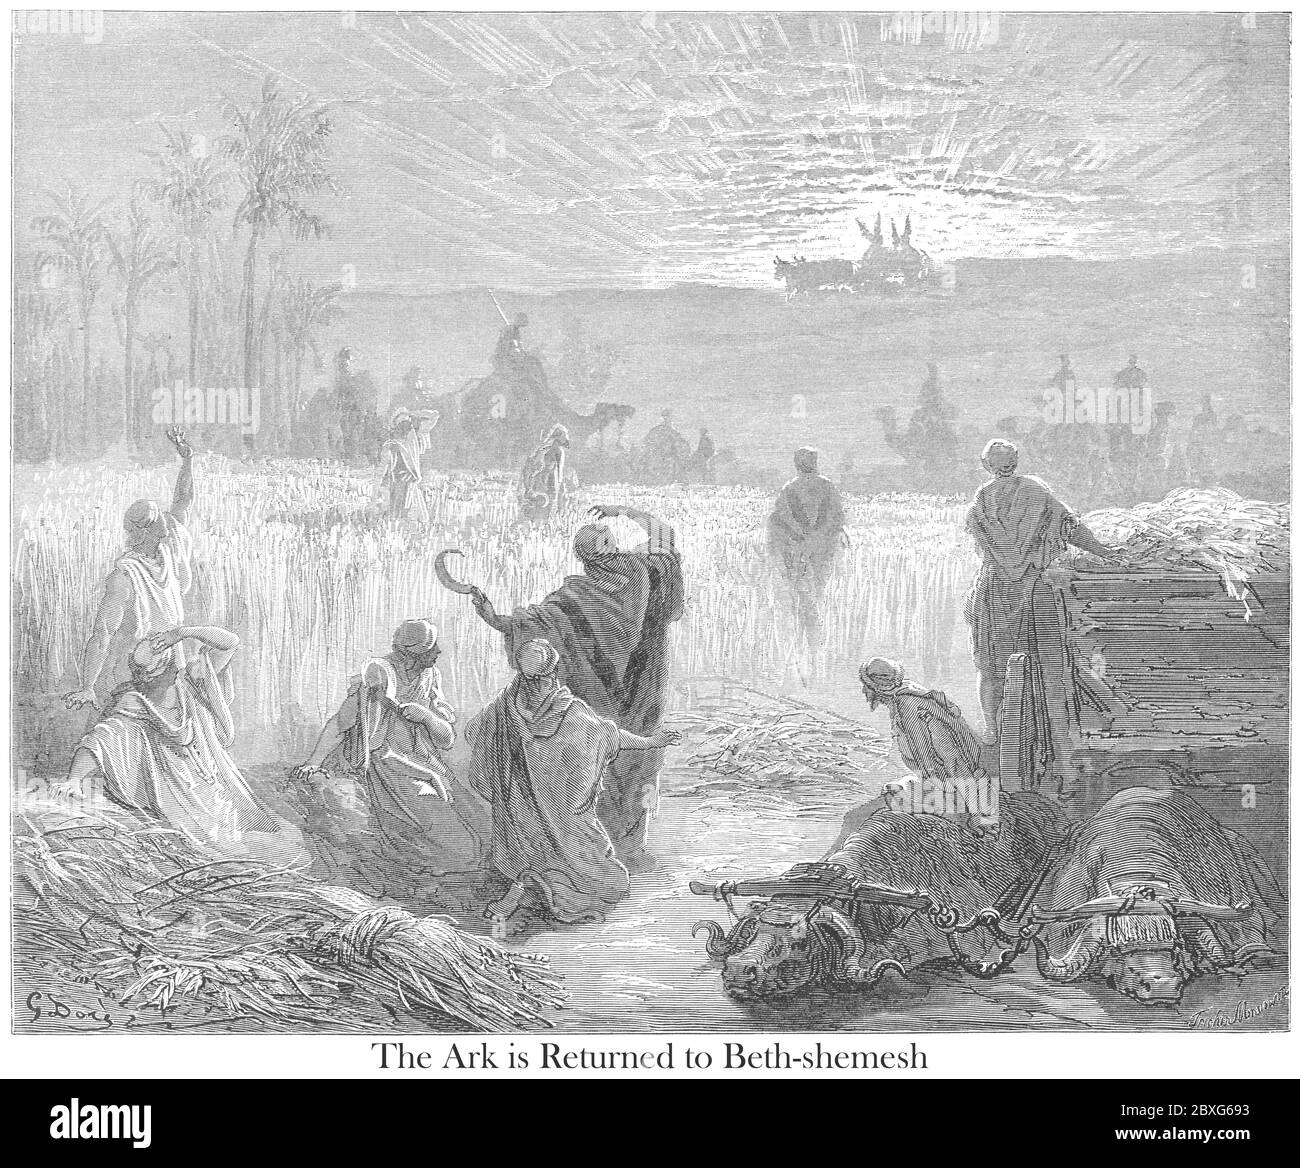 Return of the Ark [Ark of the Covenant] to Bethshemesh [Beit Shemesh] 1 Samuel 6:13 From the book 'Bible Gallery' Illustrated by Gustave Dore with Memoir of Dore and Descriptive Letter-press by Talbot W. Chambers D.D. Published by Cassell & Company Limited in London and simultaneously by Mame in Tours, France in 1866 Stock Photo